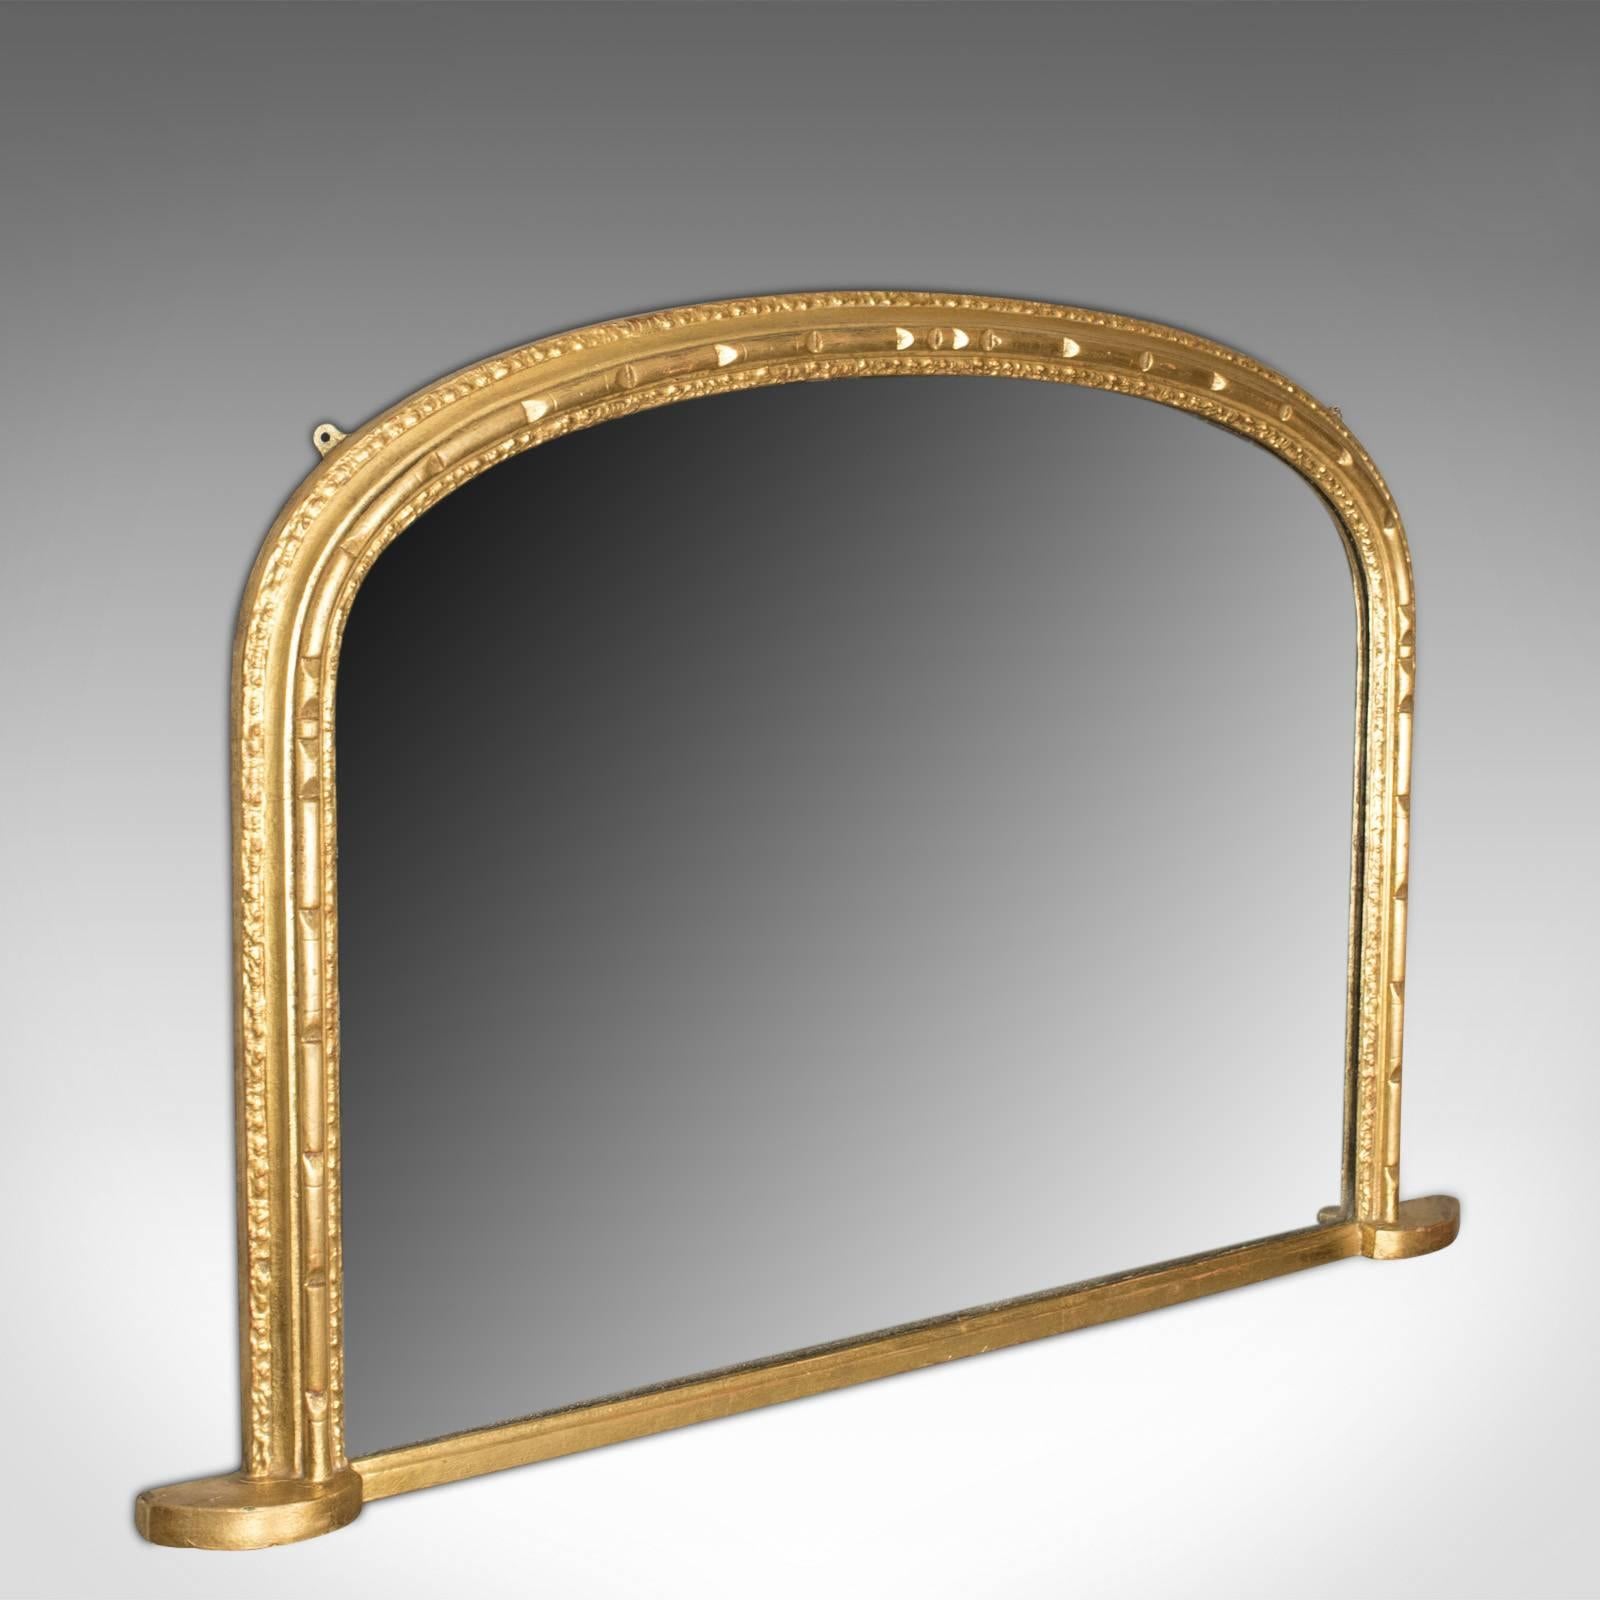 This is an antique overmantel mirror, an English, Georgian, dome topped wall mirror in giltwood and gesso dating to circa 1800.

Of classic Georgian, dome topped design
Mid-sized and of good proportion
The frame moulding a modest trace of beads